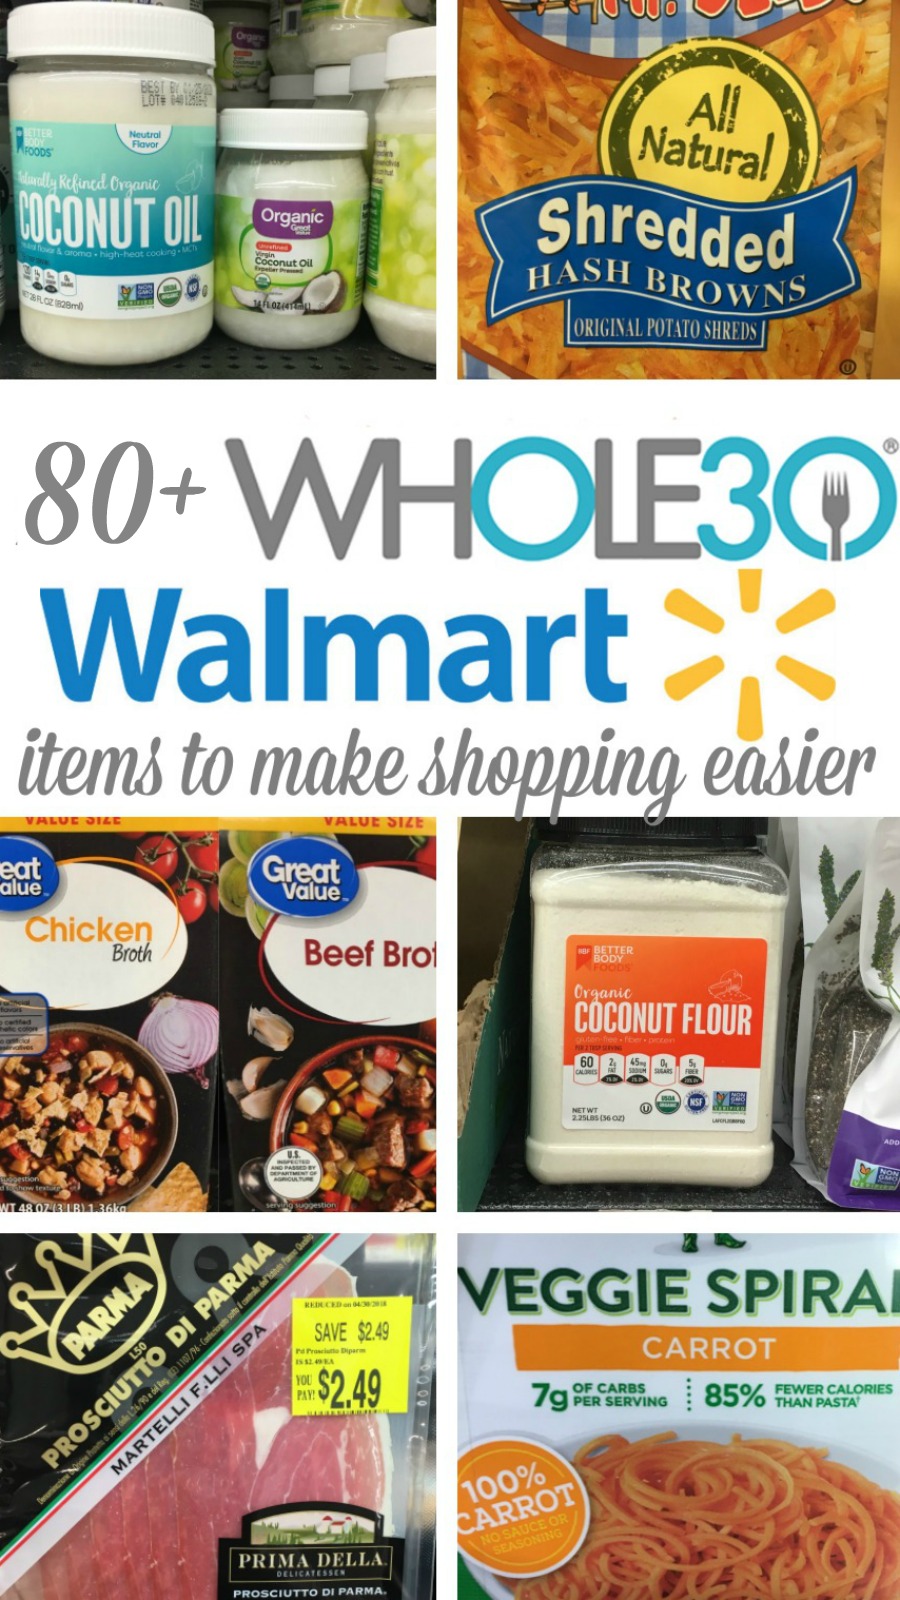 Walmart Whole30 Grocery List: 80+ Compliant Products - Whole Kitchen Sink